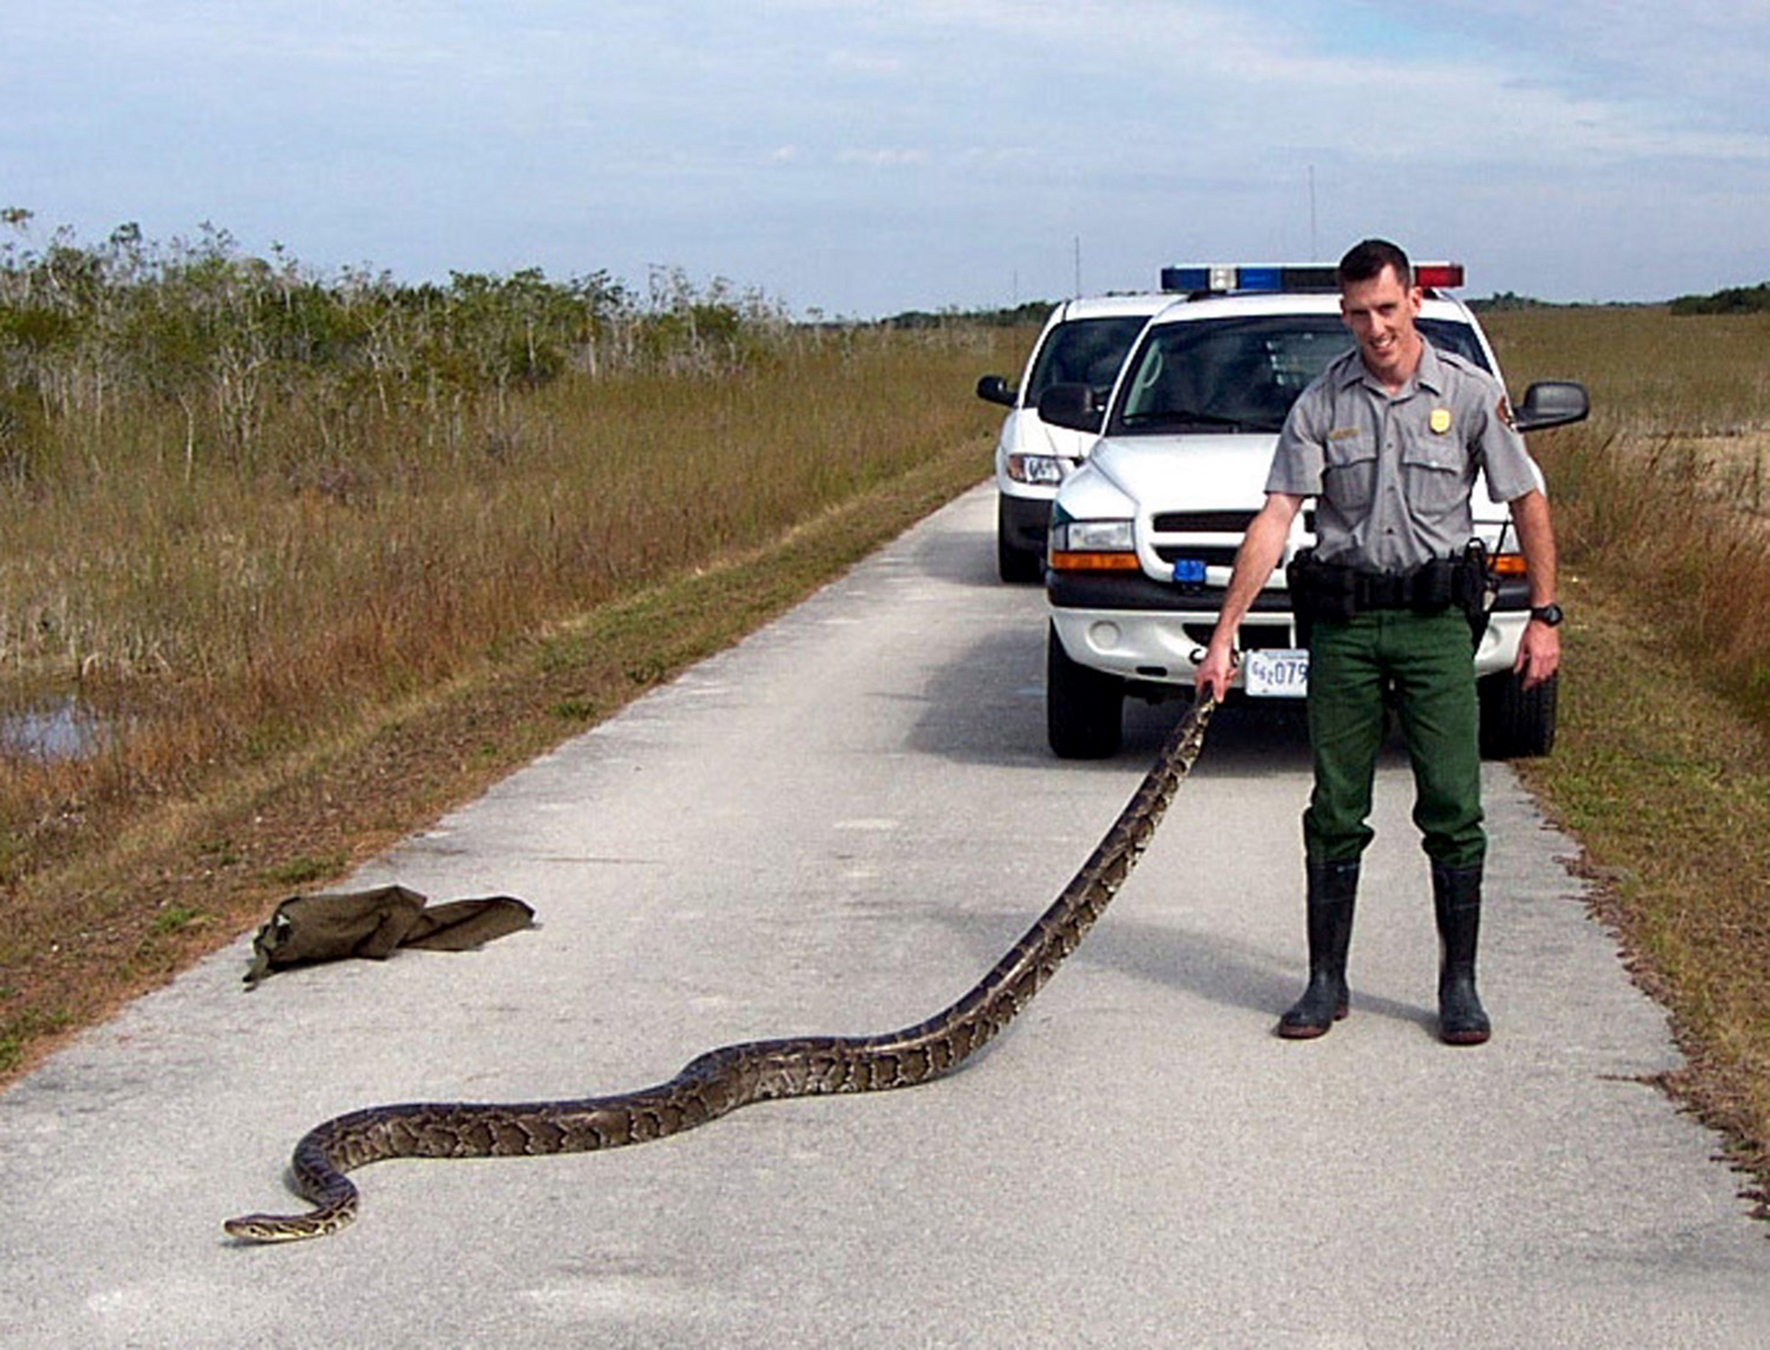 park officer in front of truck on the trail holding tail of python that stretches to the other end of the trail